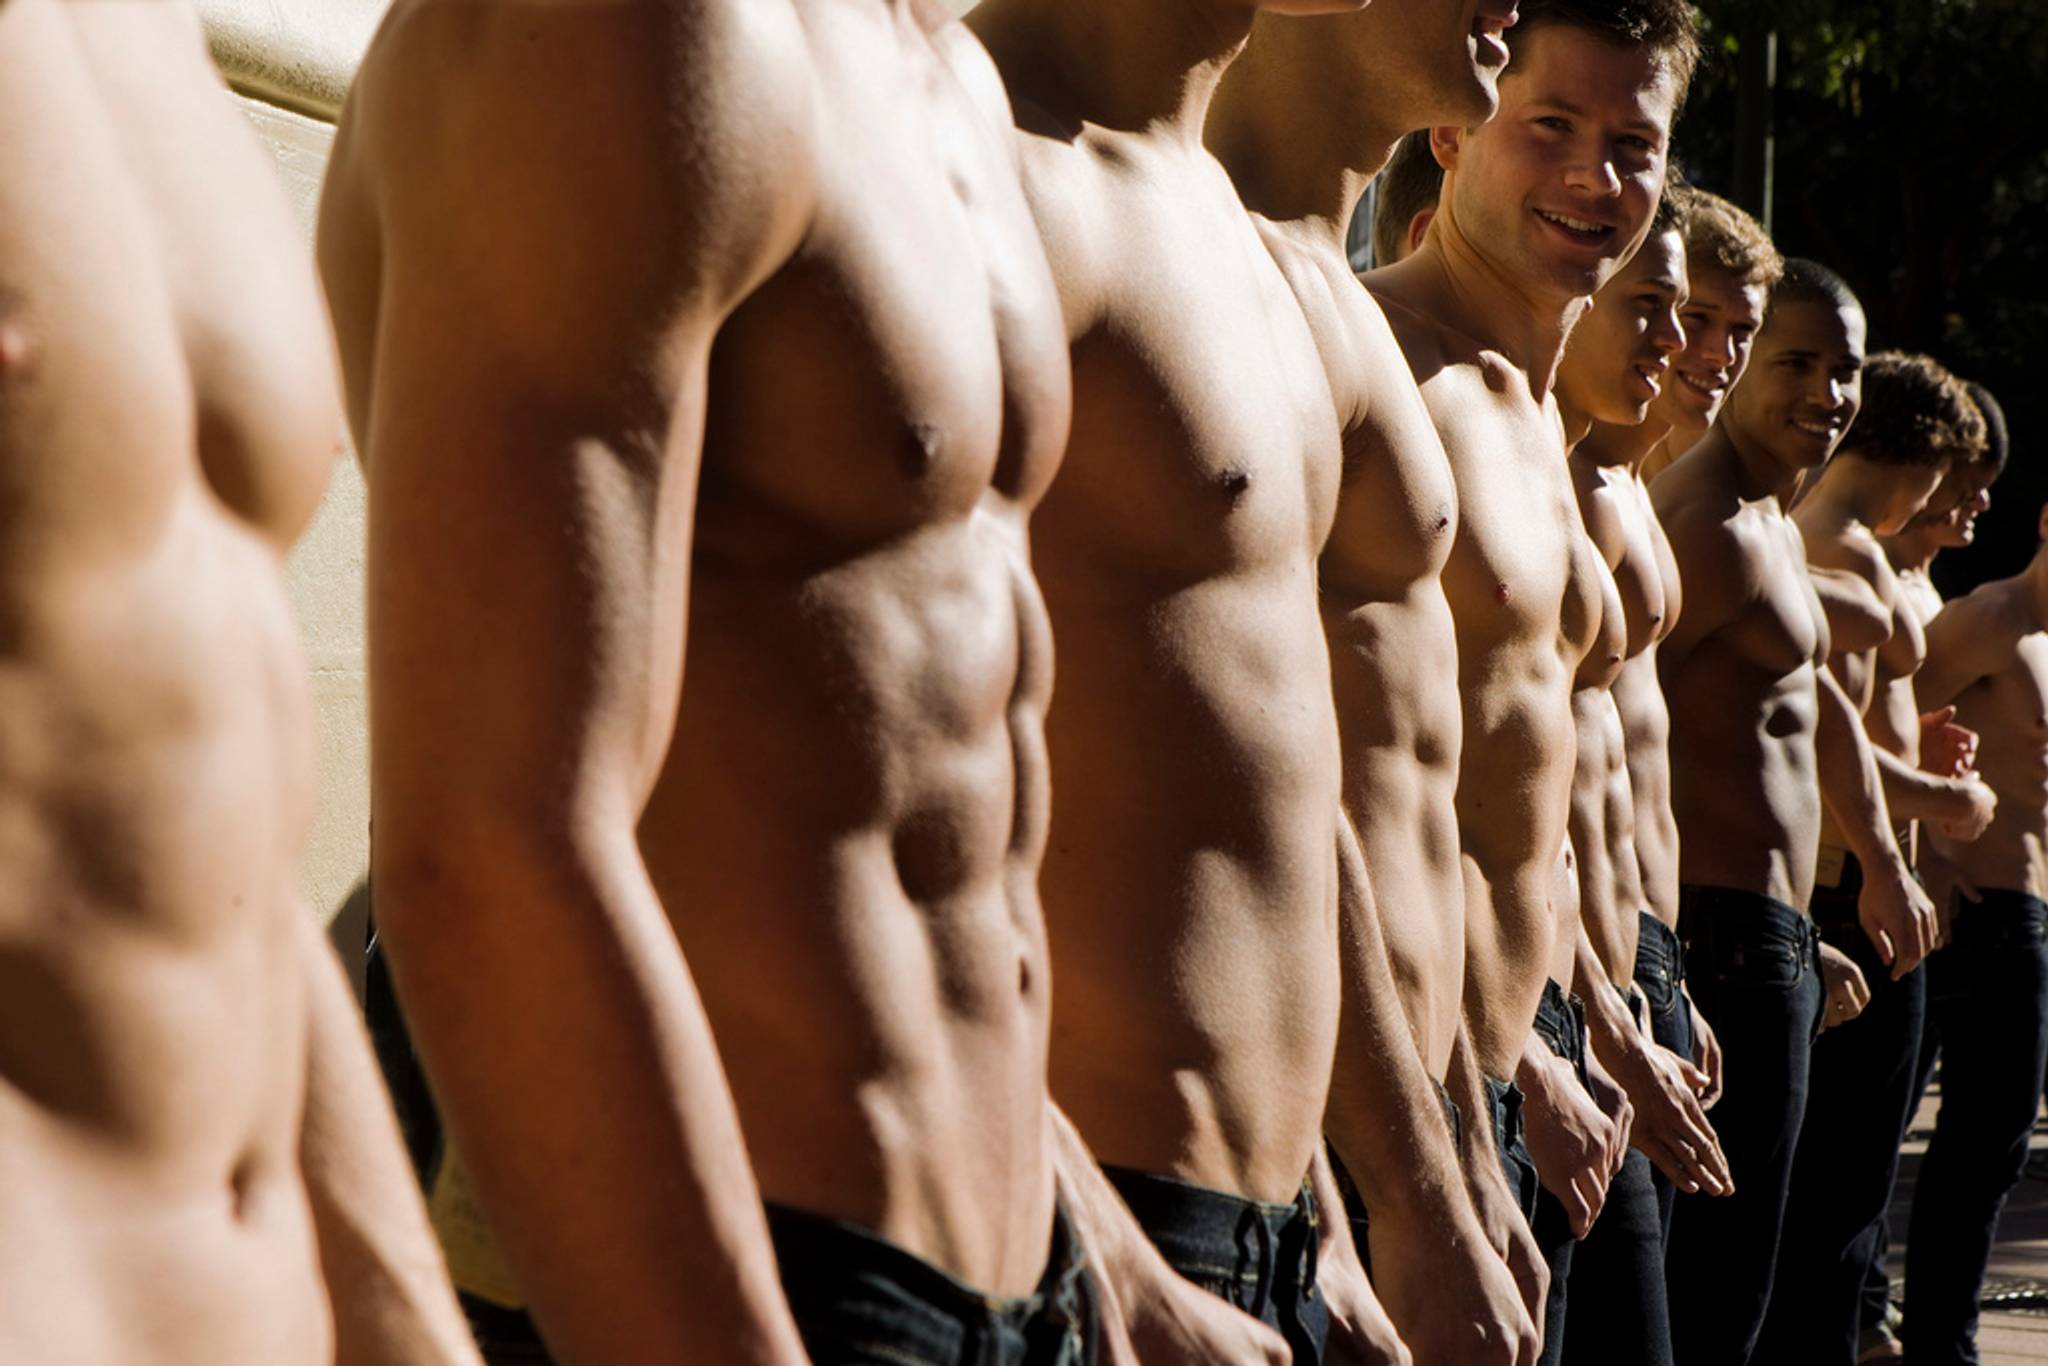 Abercrombie is dropping its beefcakes